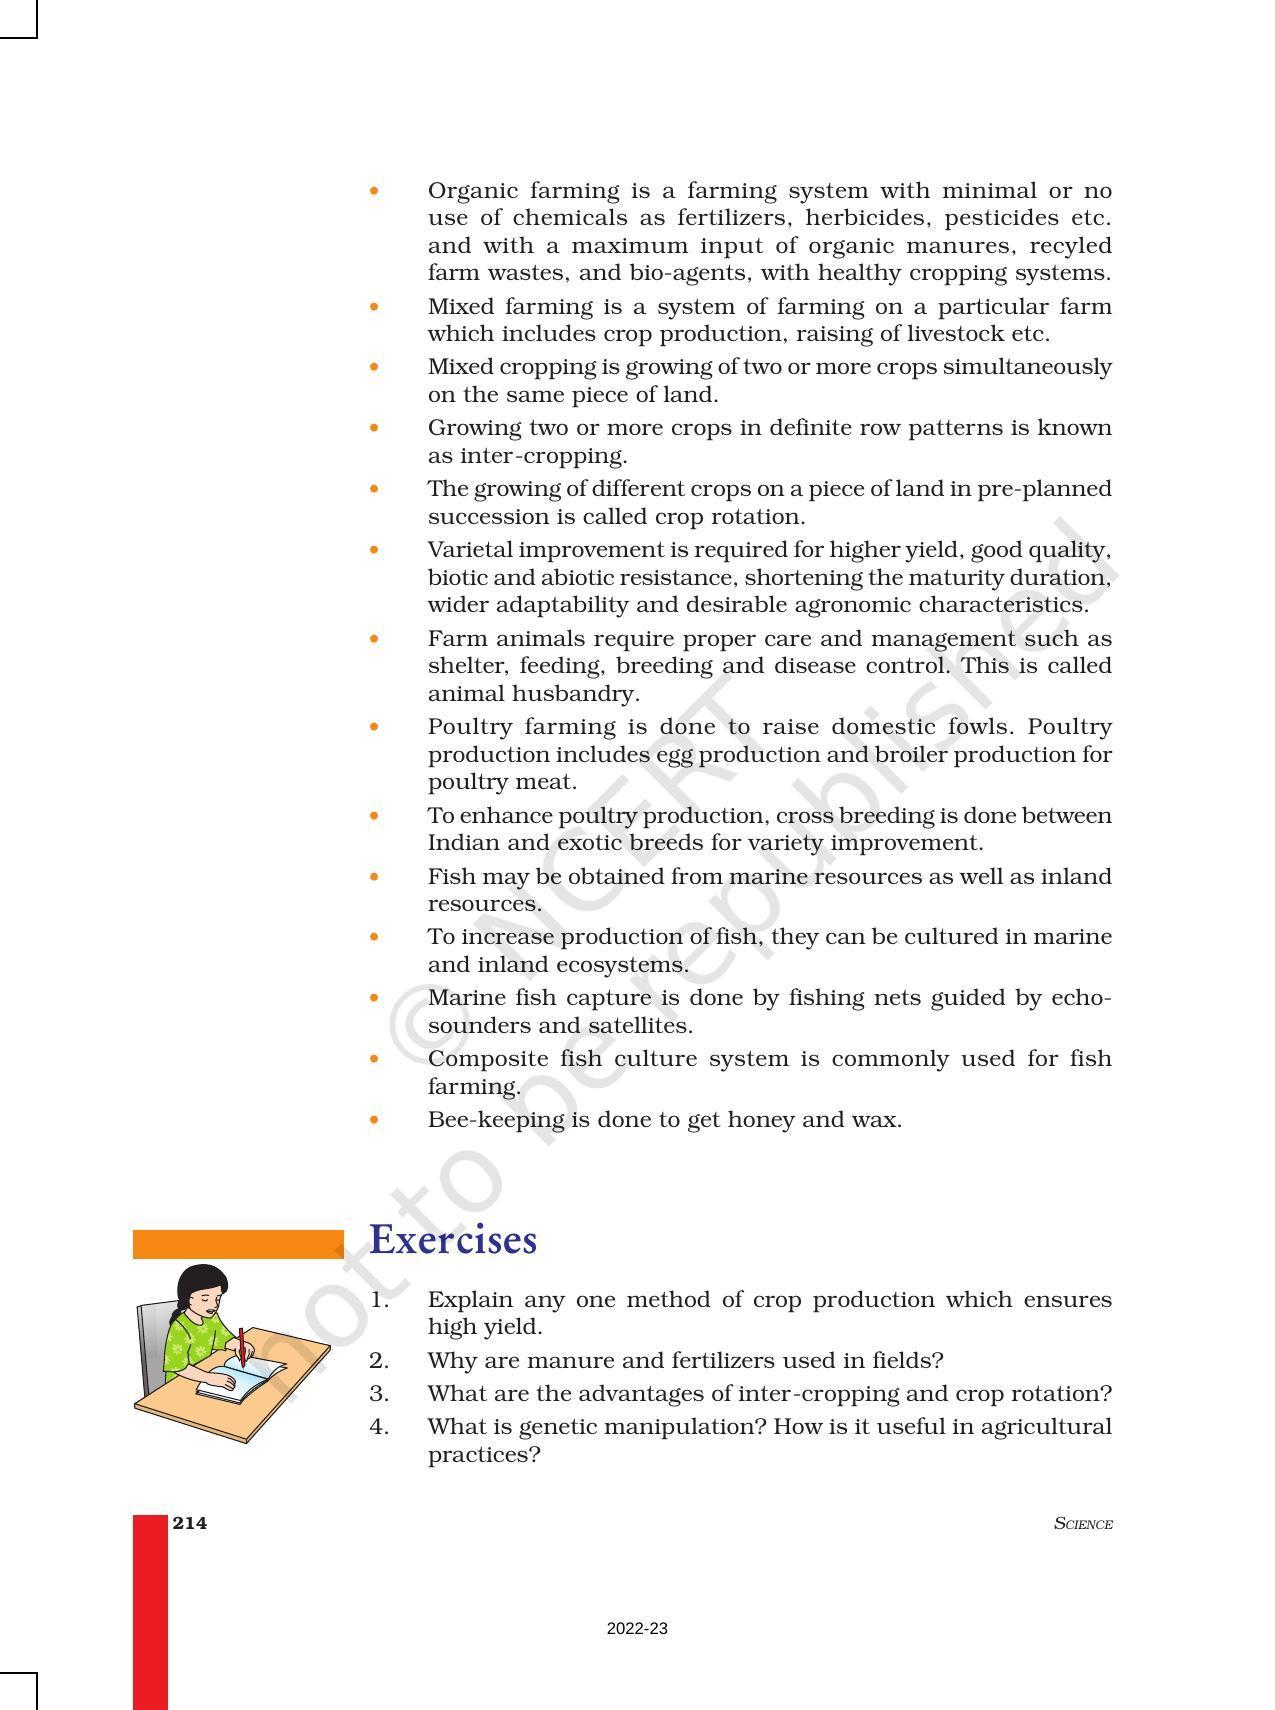 NCERT Book for Class 9 Science Chapter 15 Improvement in Food Resources - Page 12